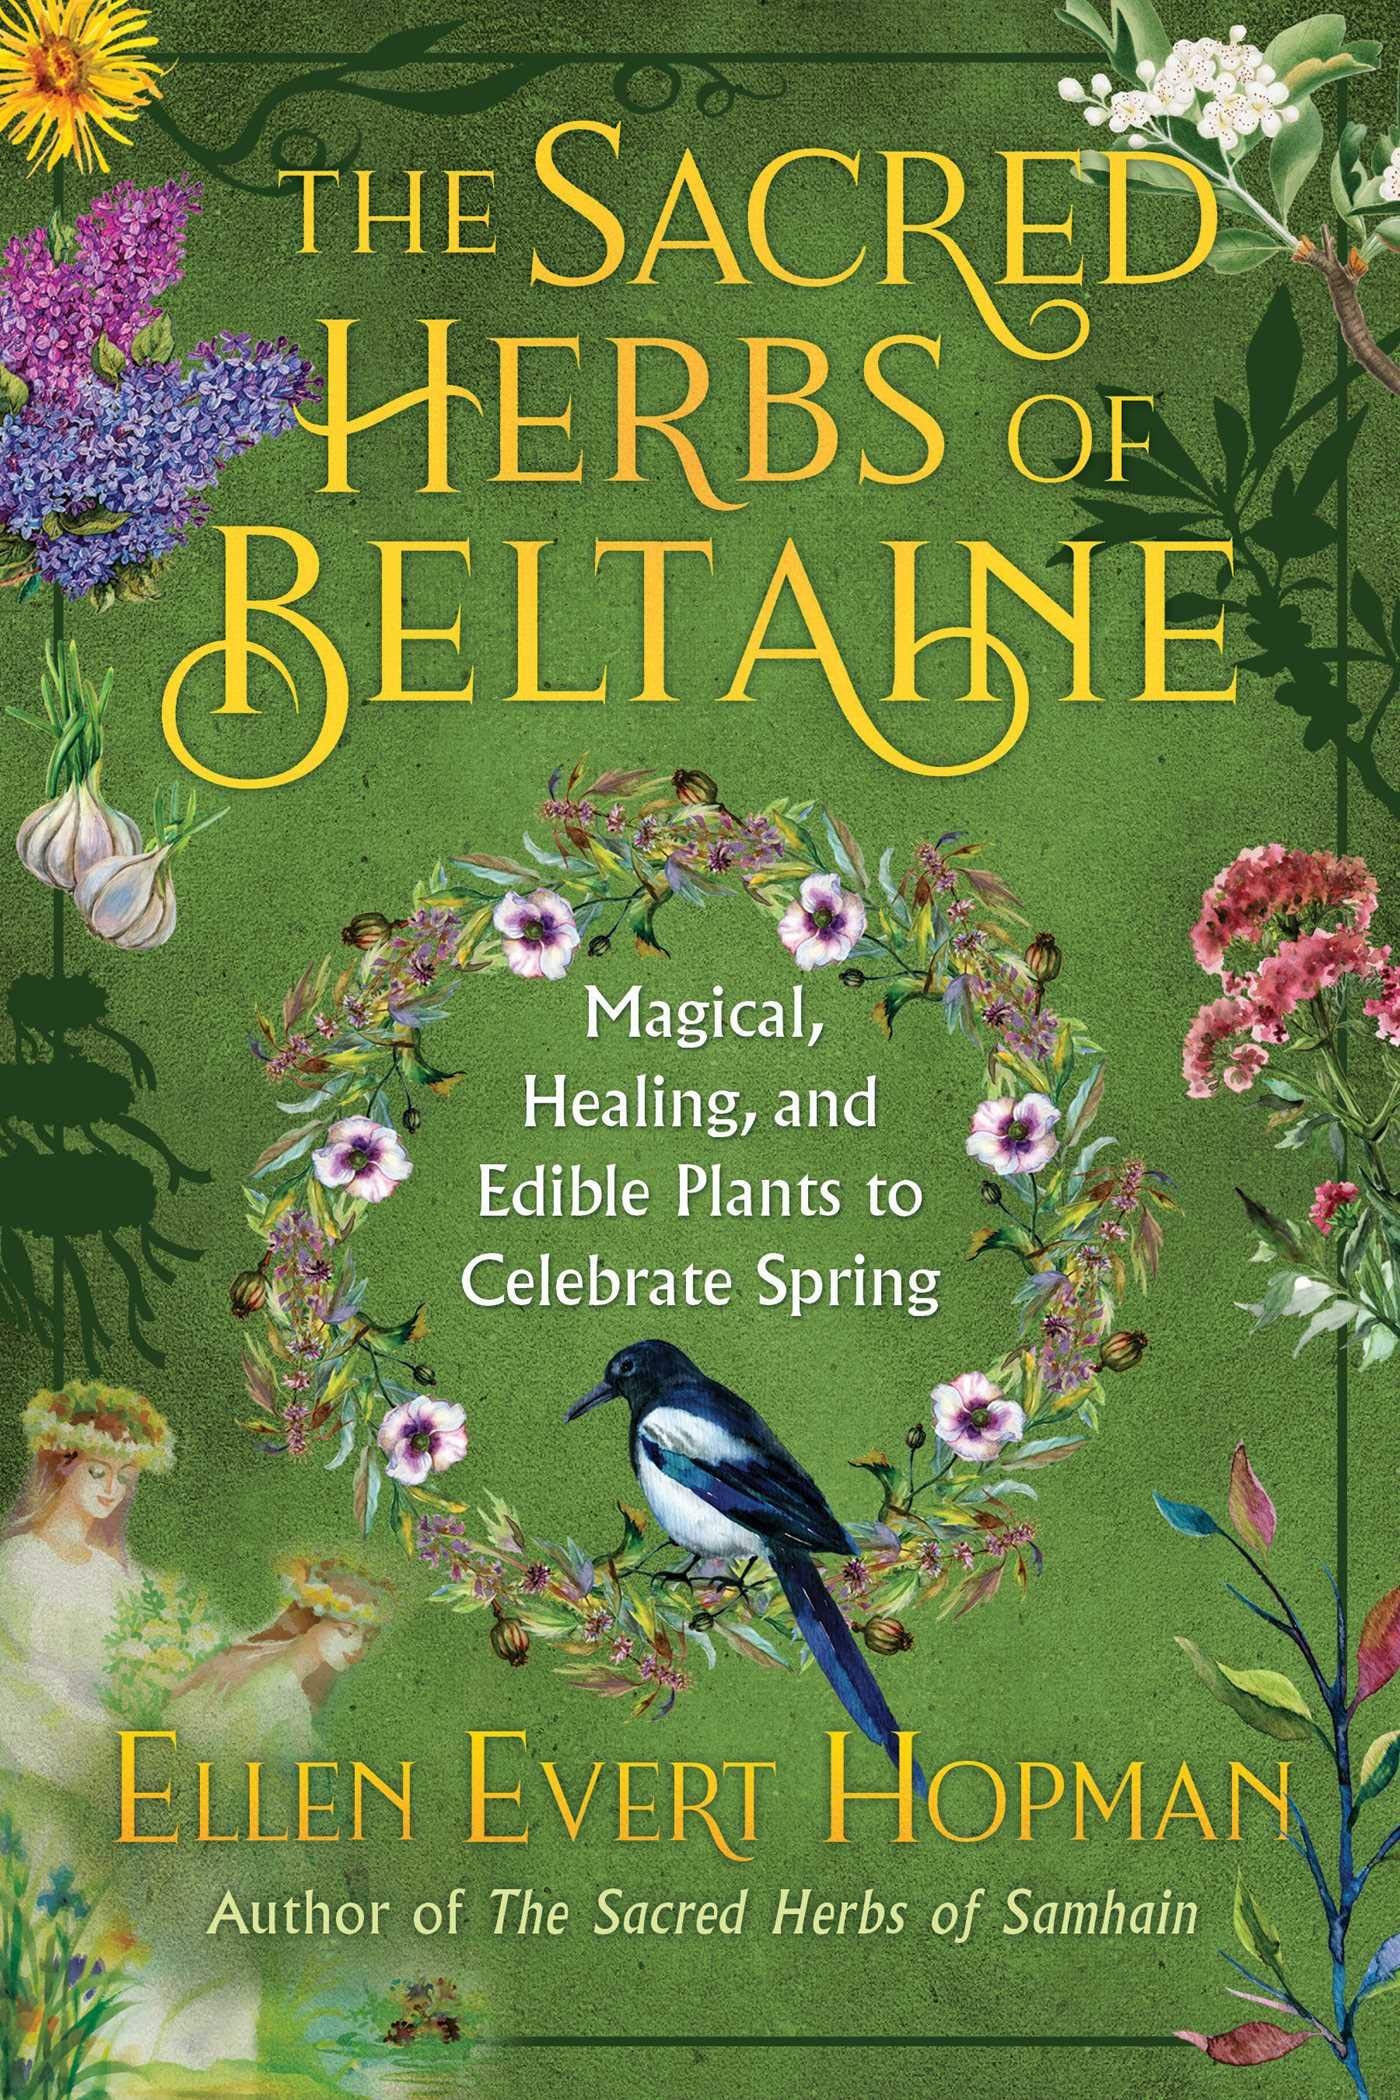 The Sacred Herbs of Beltaine